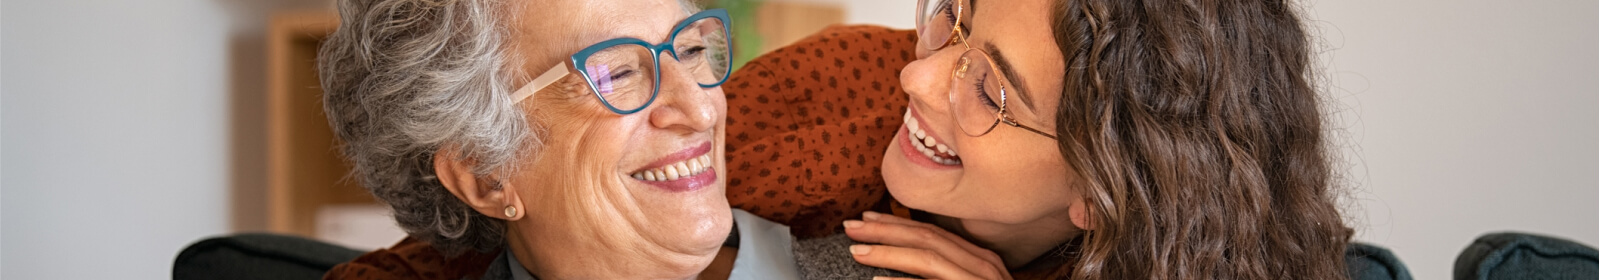 Younger and older women smiling at each other.